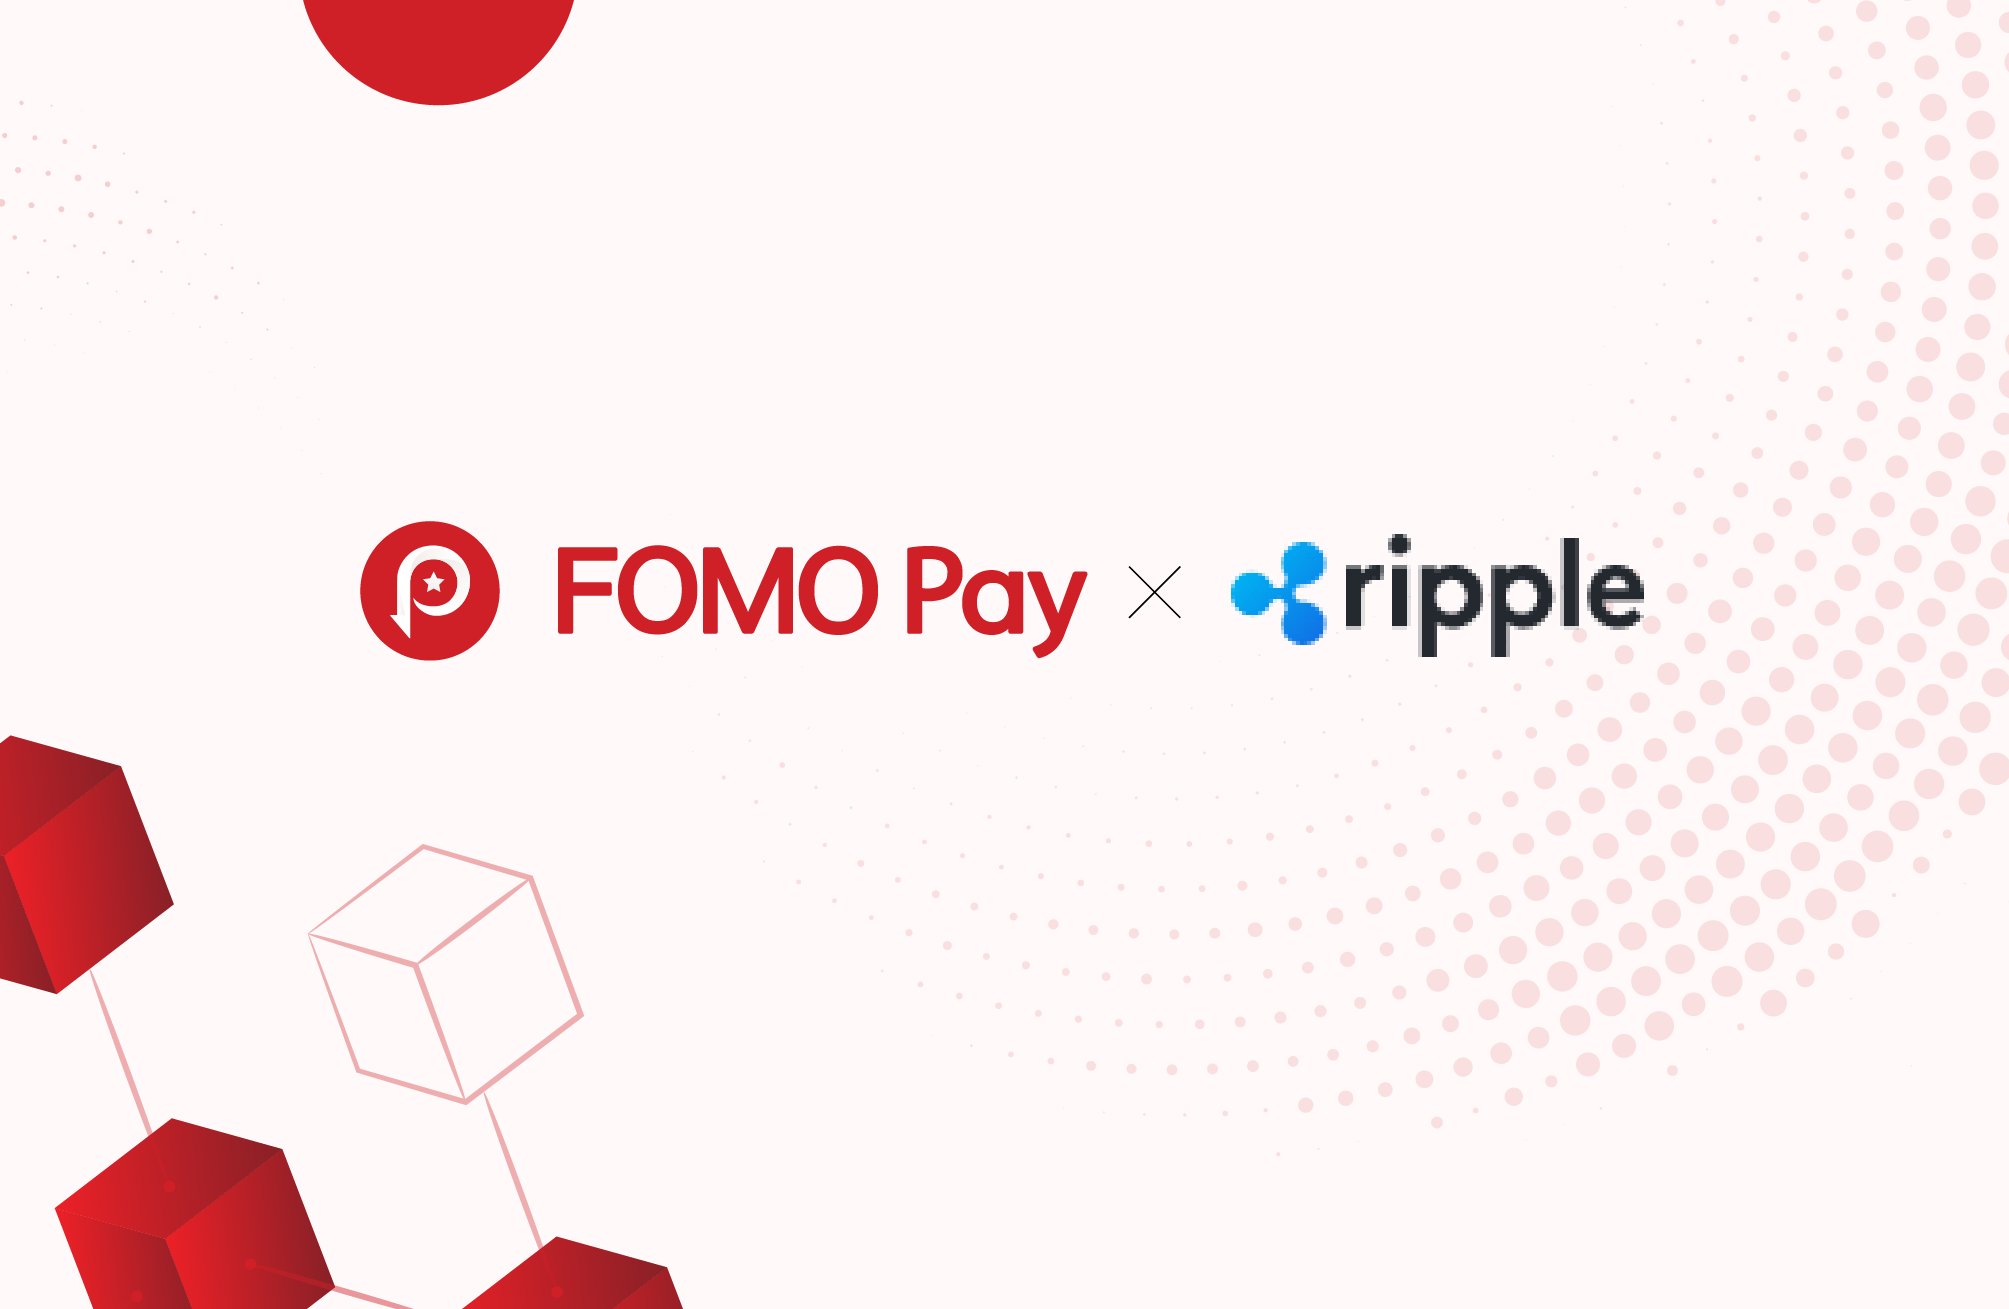 FOMO Pay to utilize Ripple’s On-Demand Liquidity for crypto-enabled treasury management